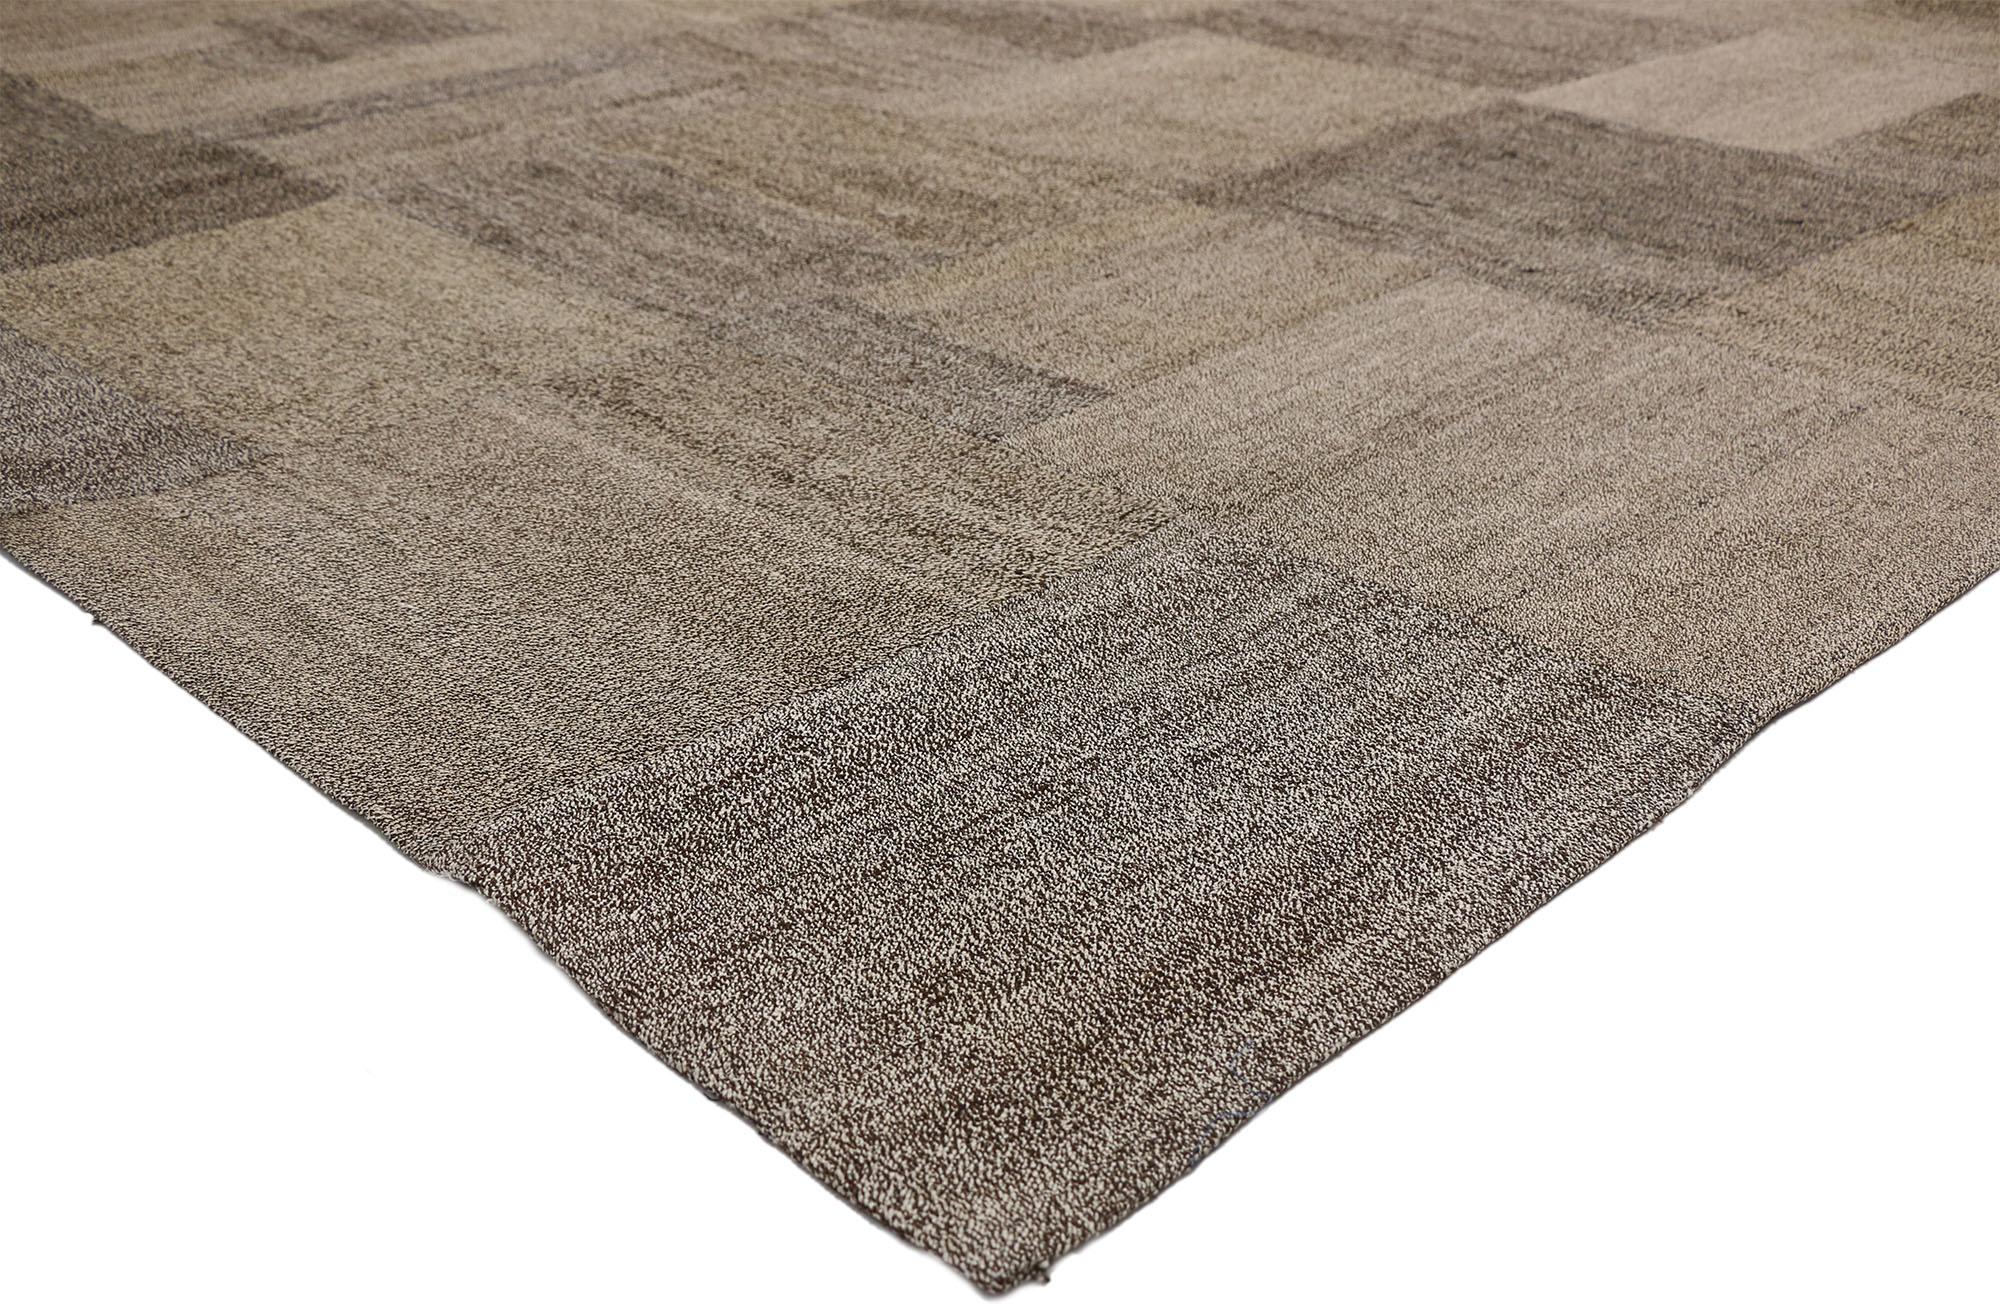 50370, vintage Turkish Patchwork Kilim rug with Scandinavian Modern style. Featuring well-balanced asymmetry with a simple design aesthetic, this handwoven Turkish Patchwork Kilim rug adds texture and subtle graphic appeal forming a warm, relaxed